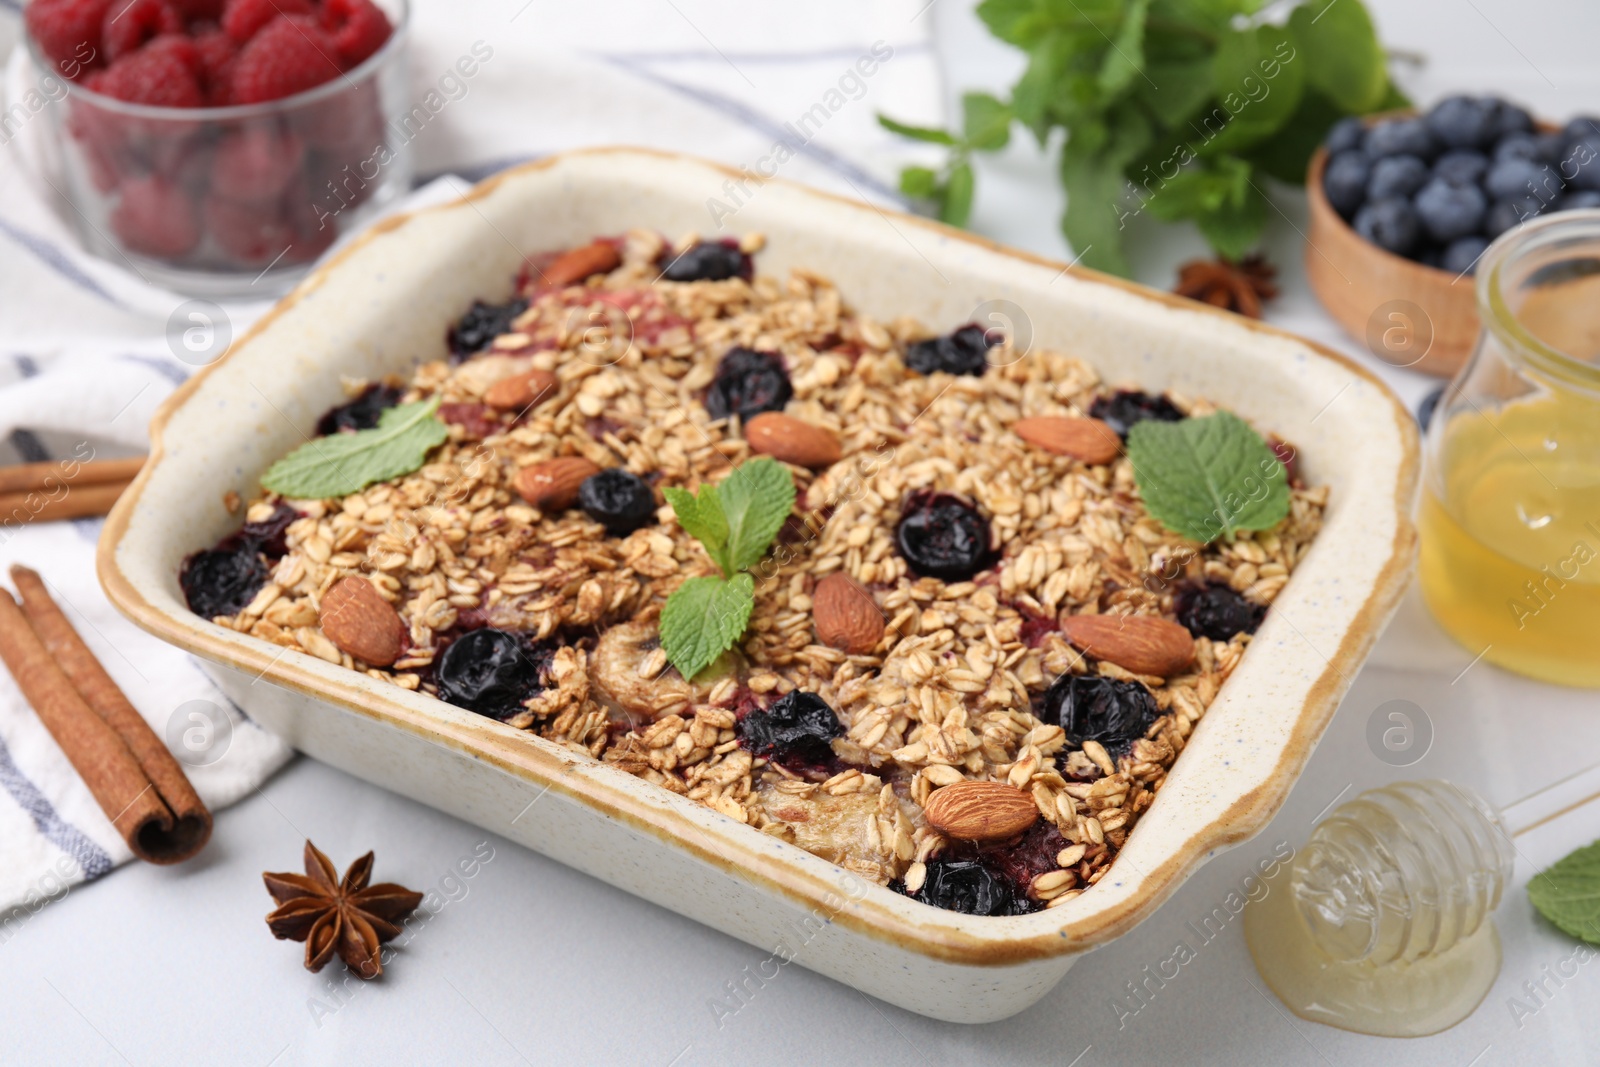 Photo of Tasty baked oatmeal with berries, almonds and spices in baking tray on white table, closeup